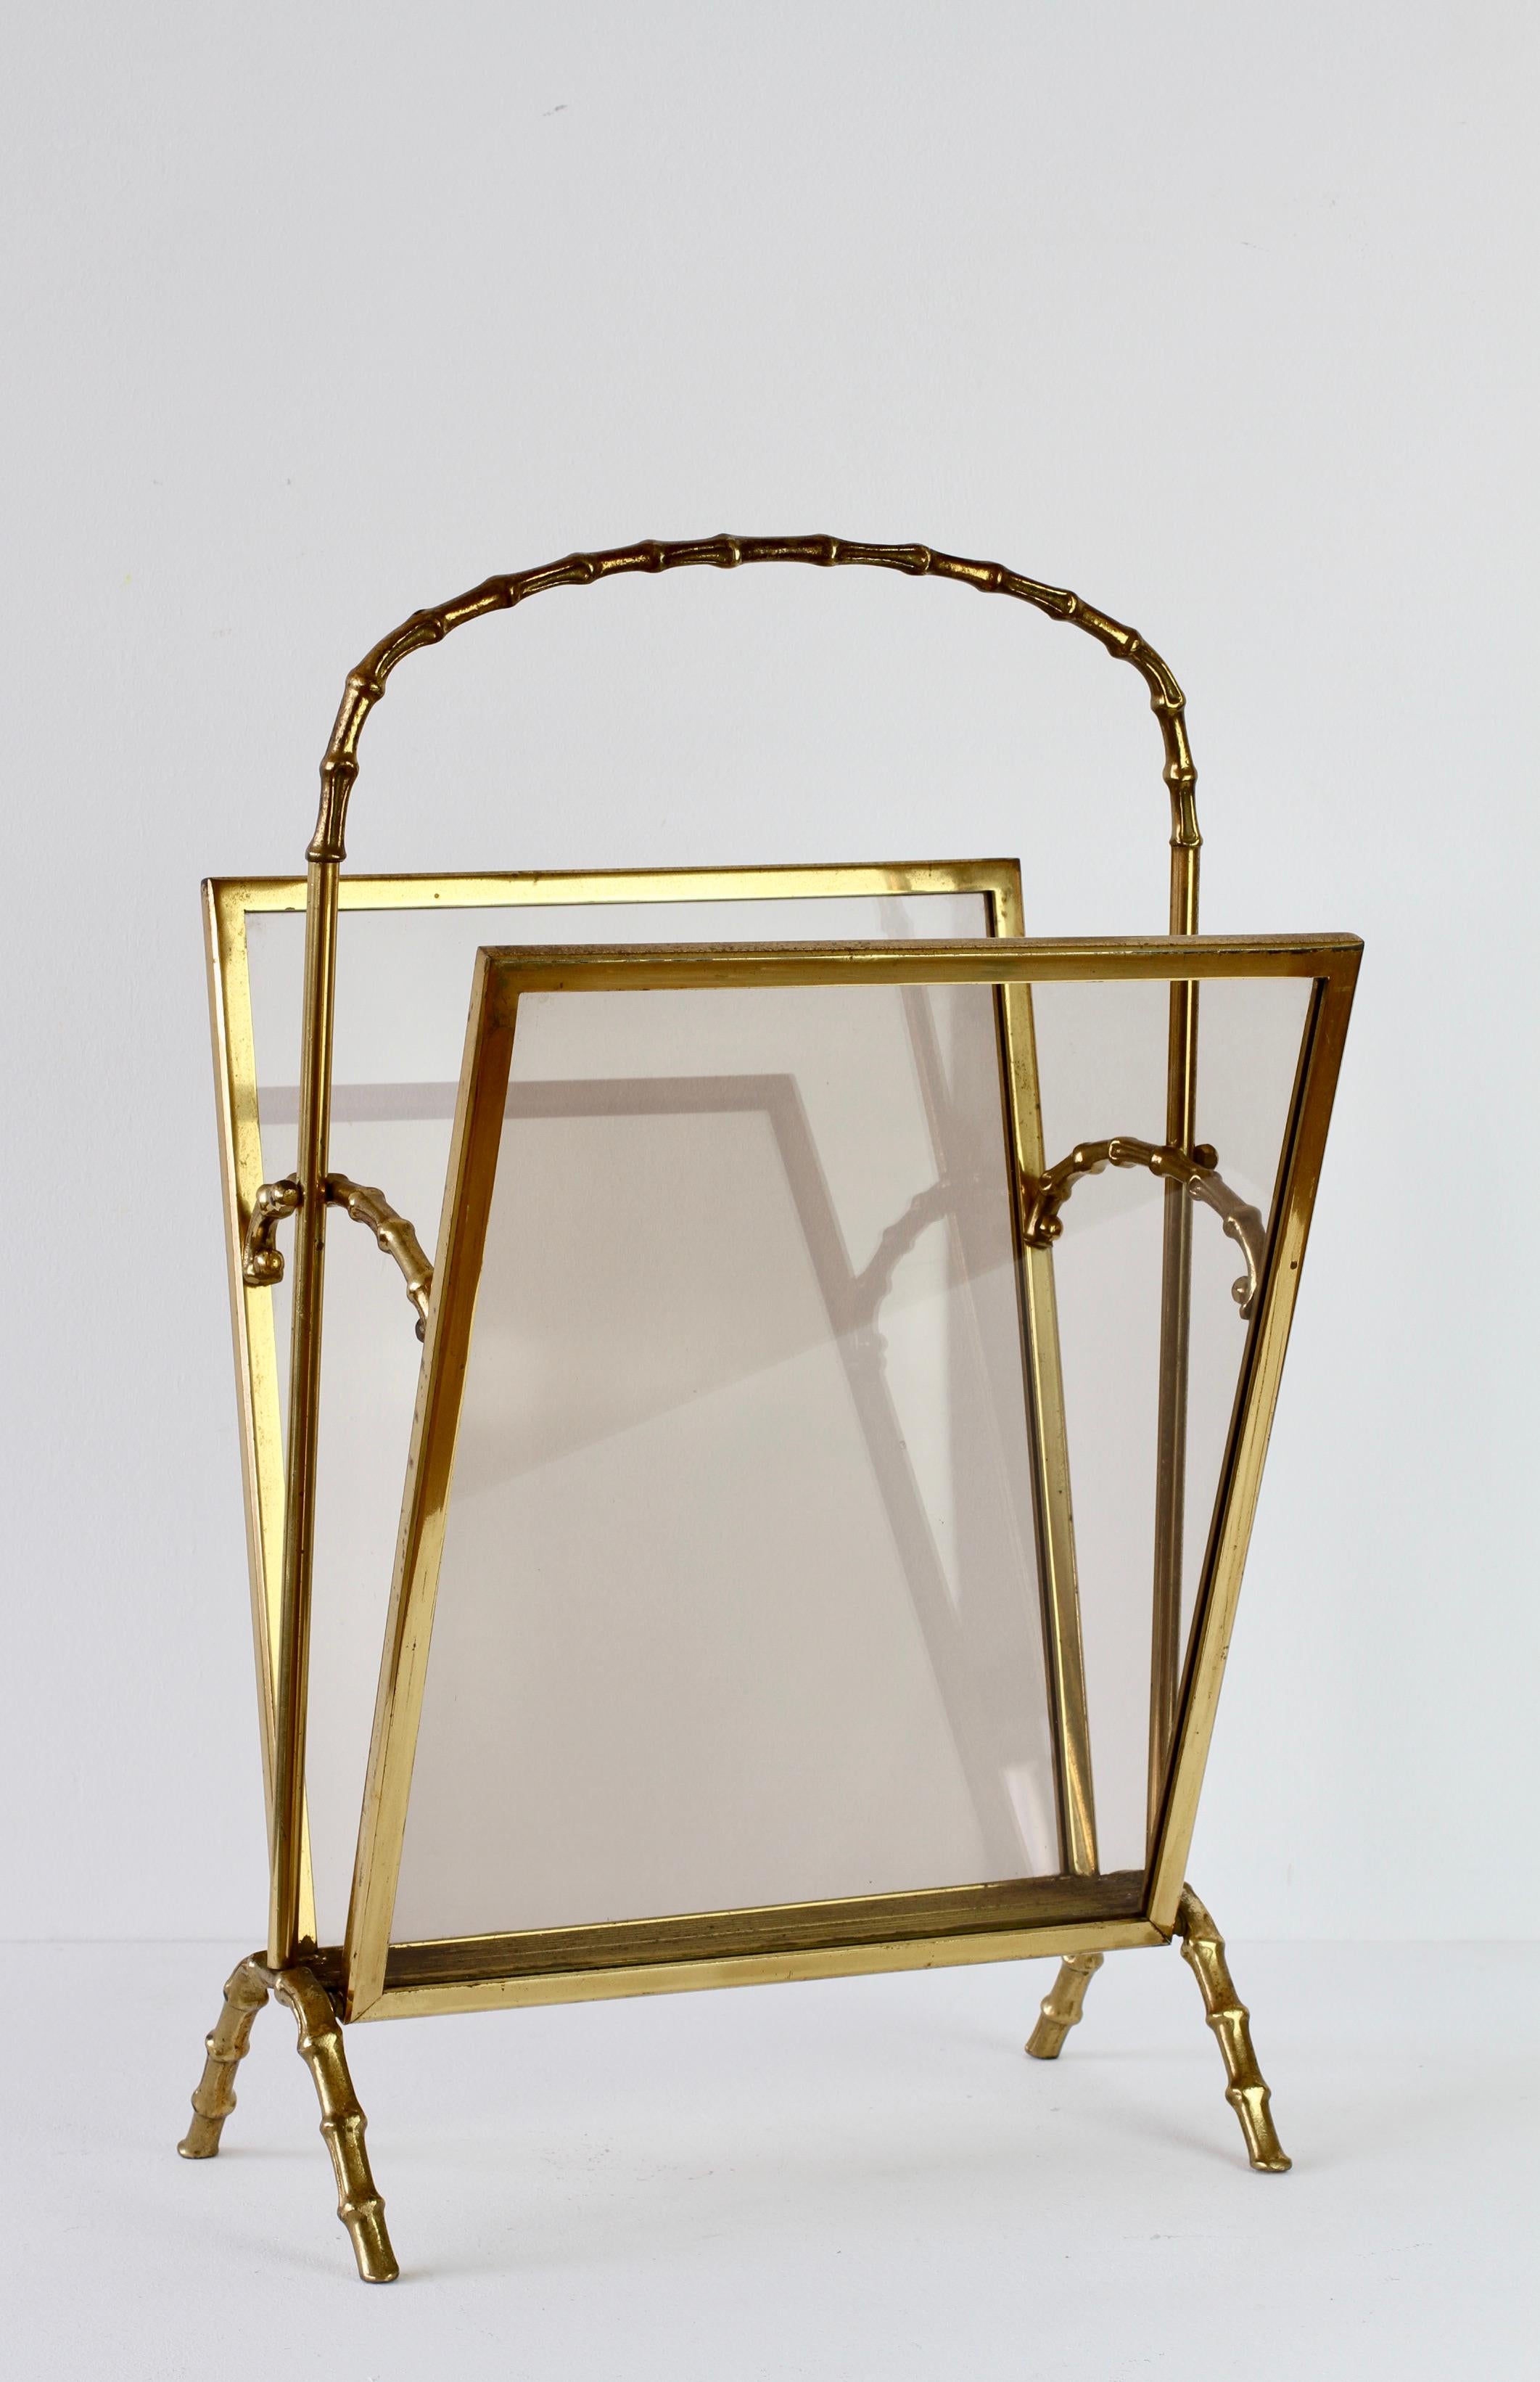 20th Century Maison Baguès Attr. Cast Brass Faux Bamboo Magazine Rack or Newspaper Stand For Sale